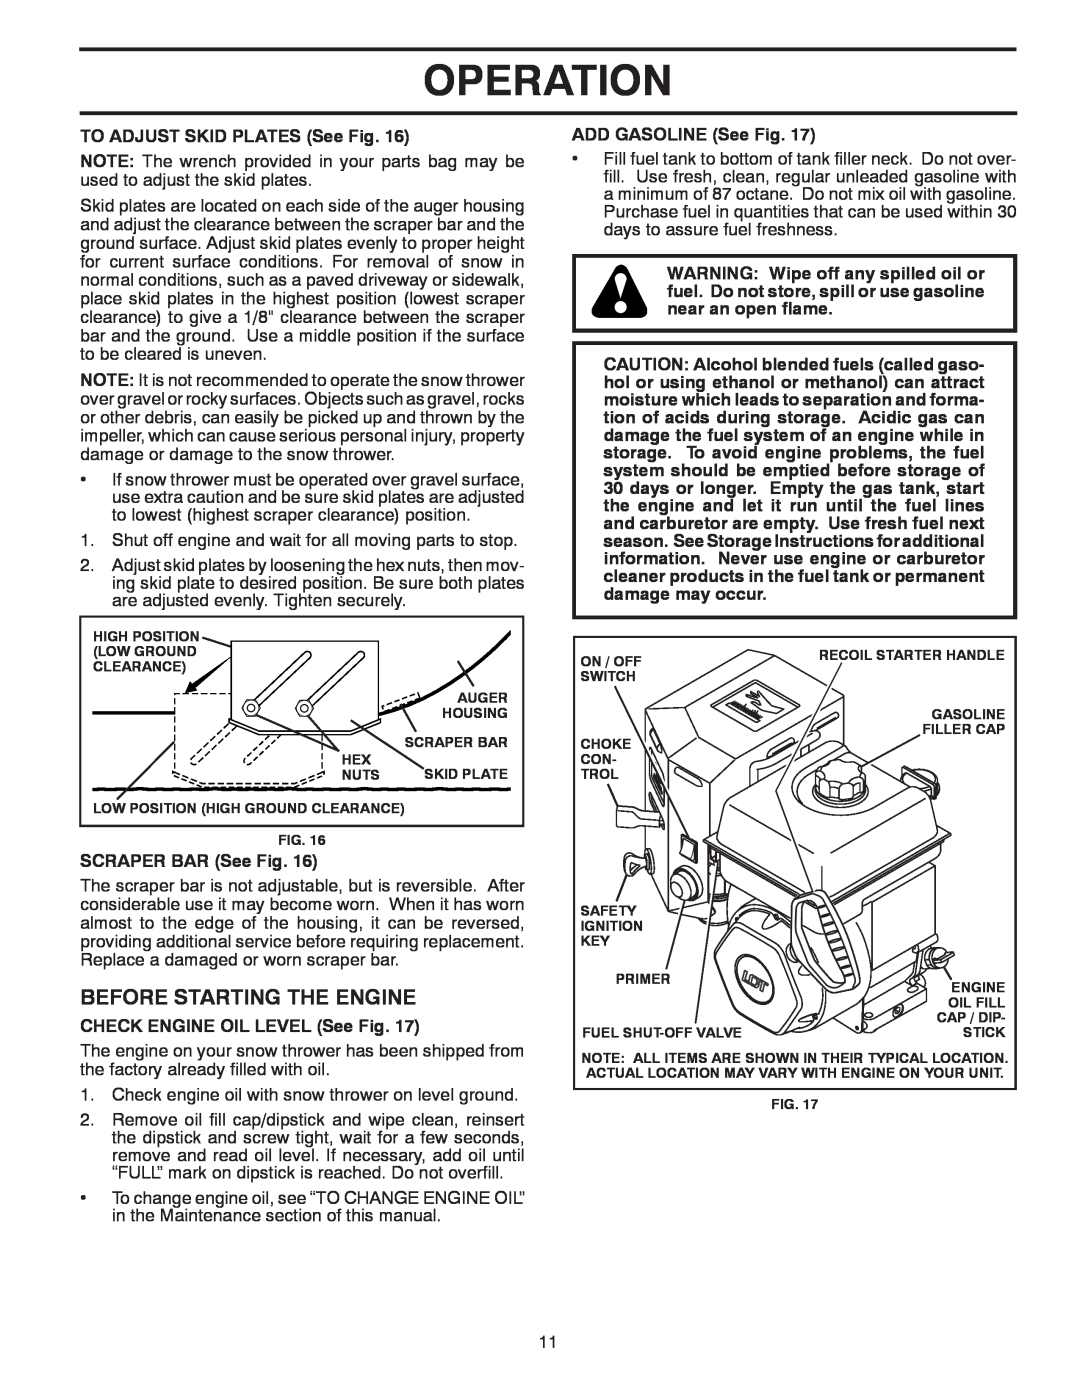 Poulan 96192003700, 435356 Before Starting The Engine, Operation, TO ADJUST SKID PLATES See Fig, SCRAPER BAR See Fig 